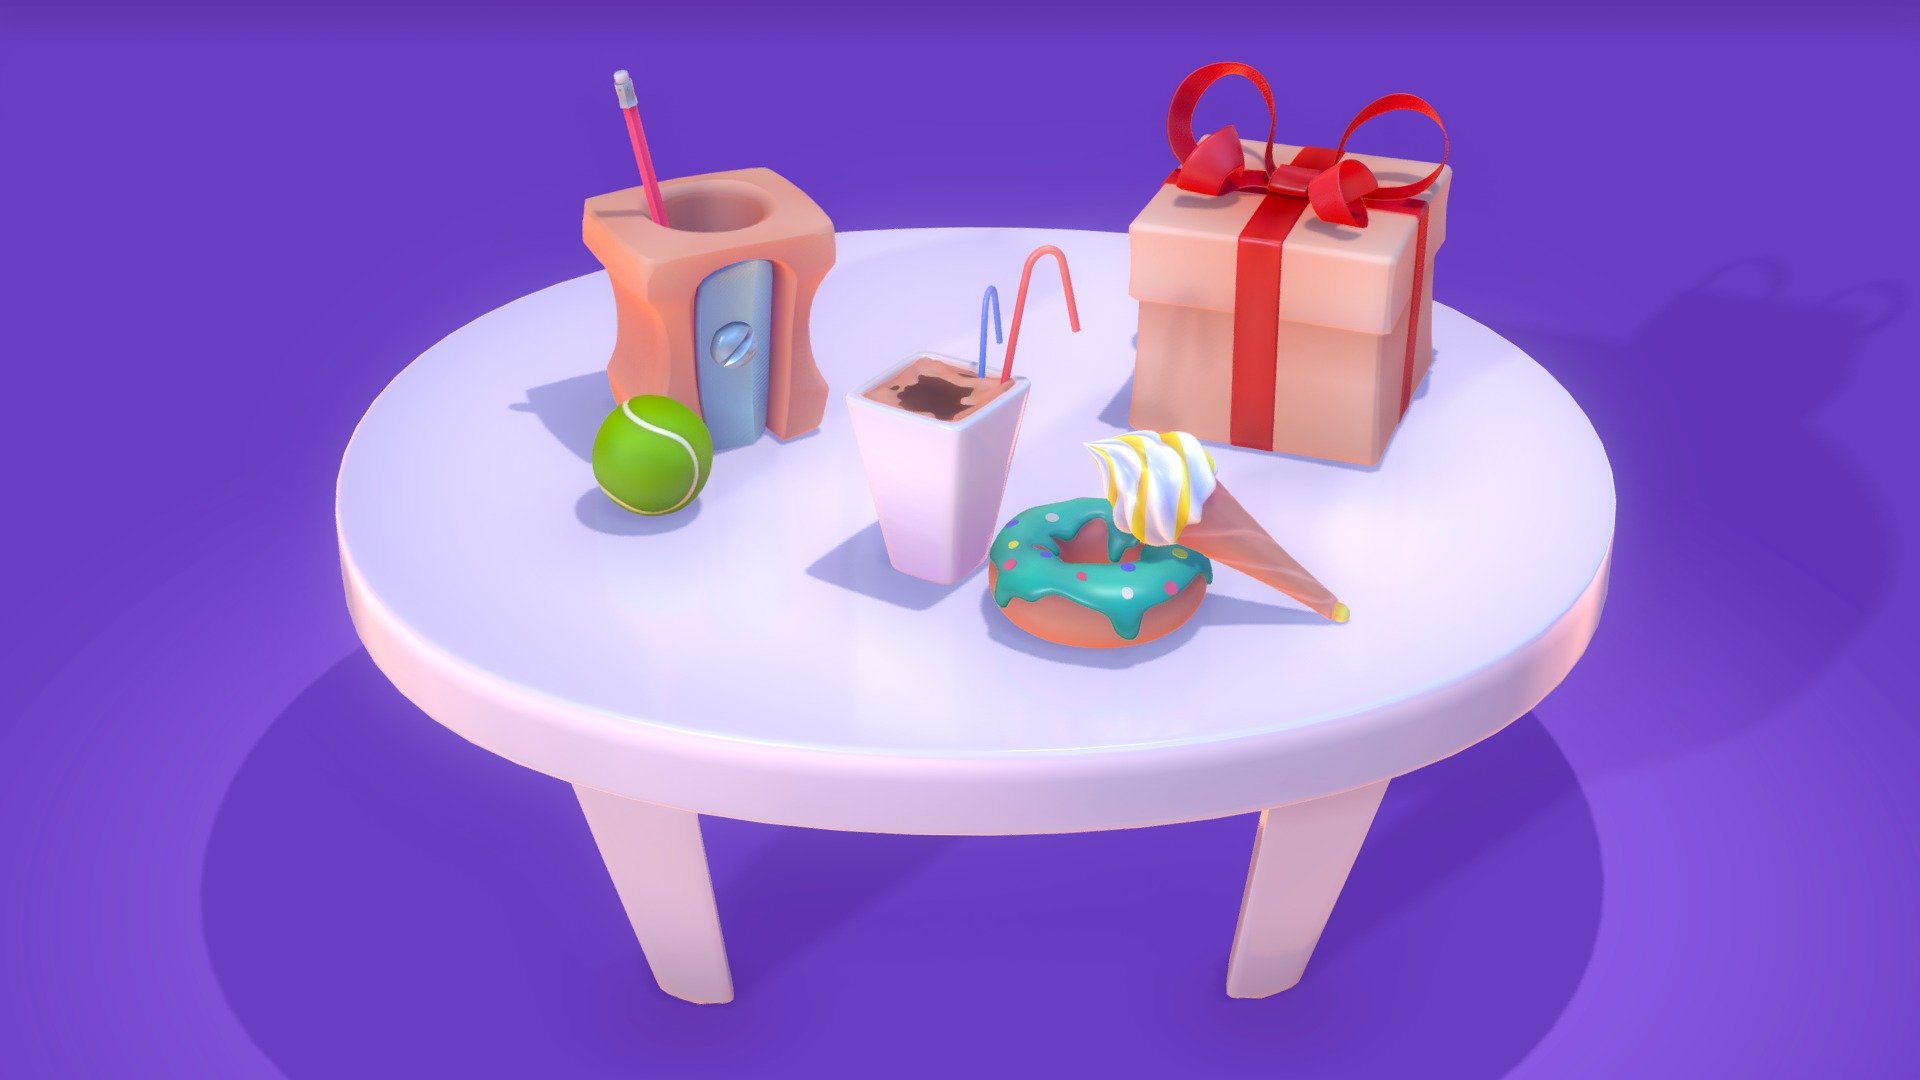 A little table with various interesting stuff.
No textures. Only vertex color. Turbosmooth was applied to all lowpoly objects before uploading to make forms smoother 3d model